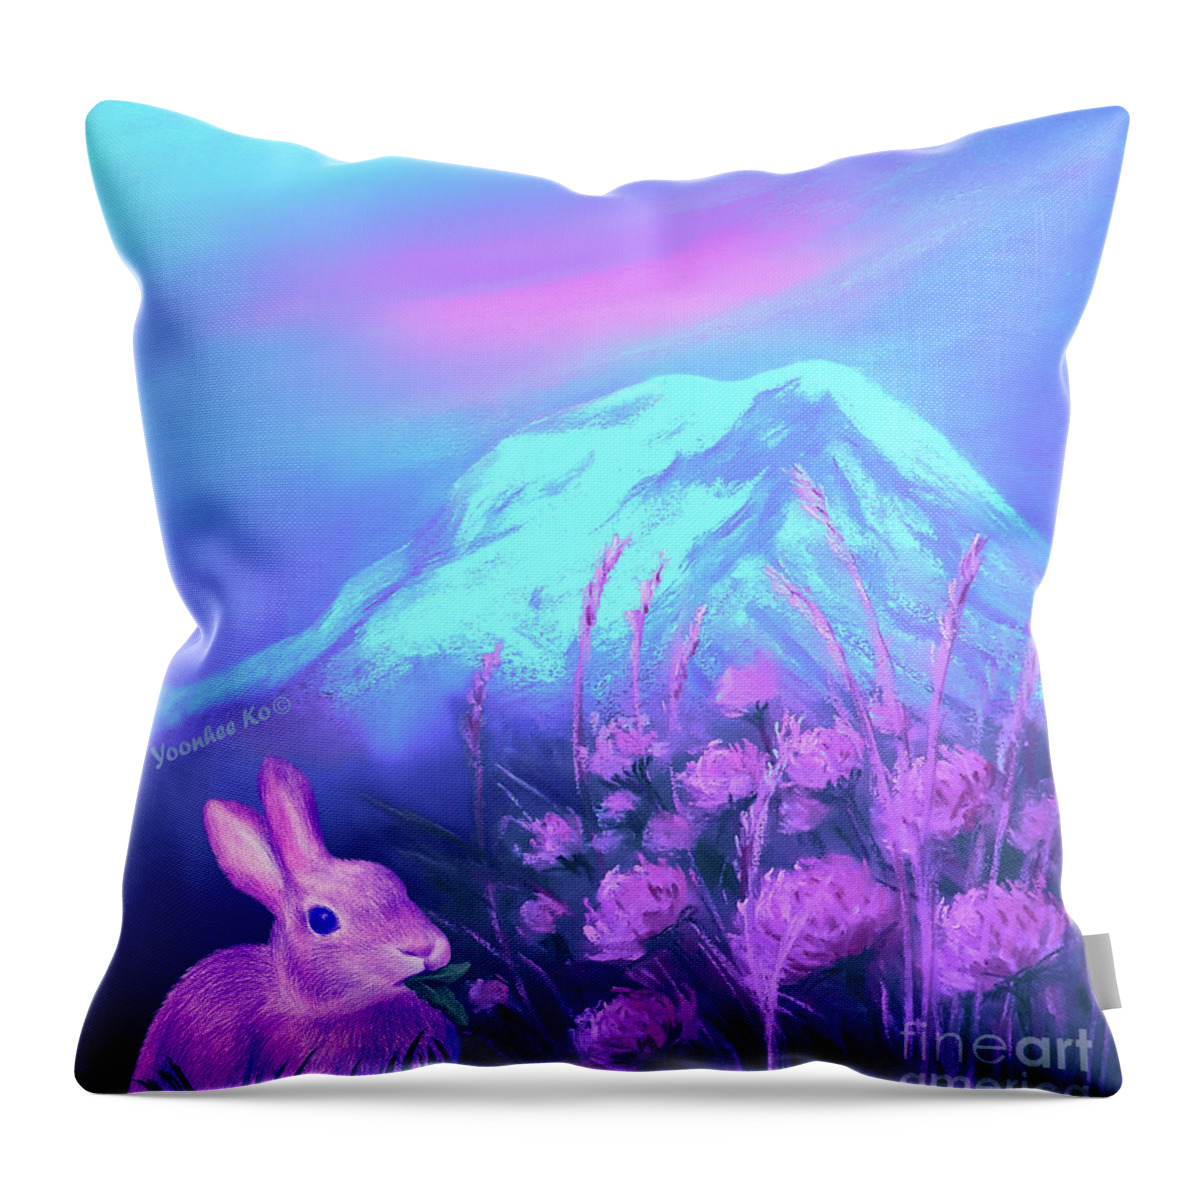 Mount Rainier Throw Pillow featuring the painting Bunny's Memory of Mount Rainier by Yoonhee Ko